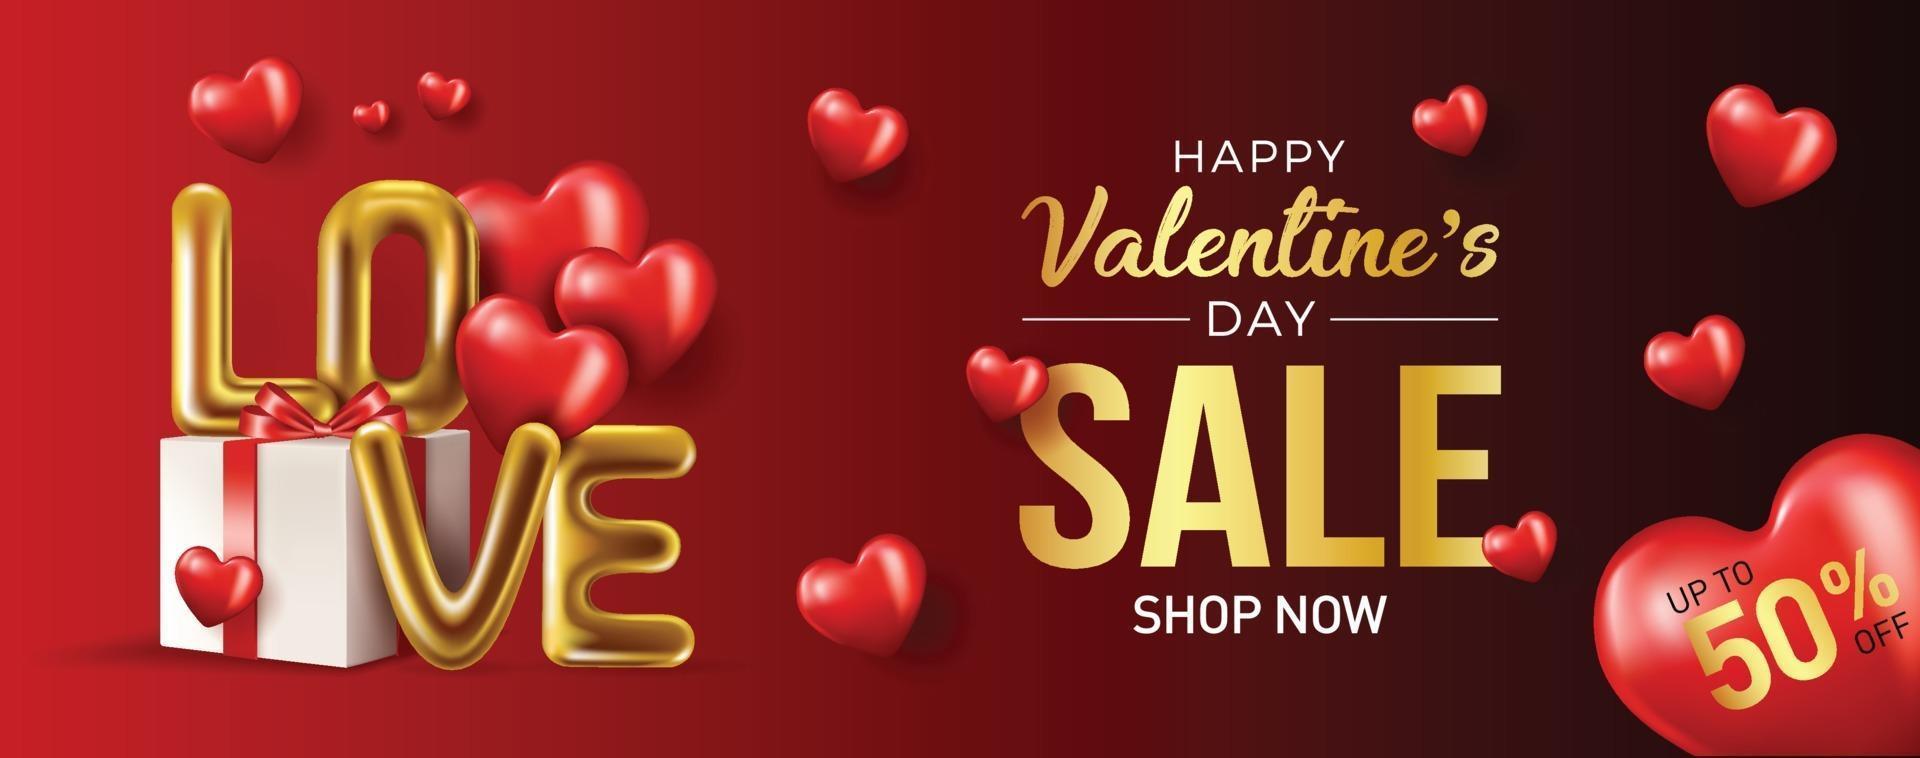 Happy valentines day vector banner greeting card with valentine elements like gift and hearts design in red background. Gold metallic text Love, realistic red balloons. Vector Illustration